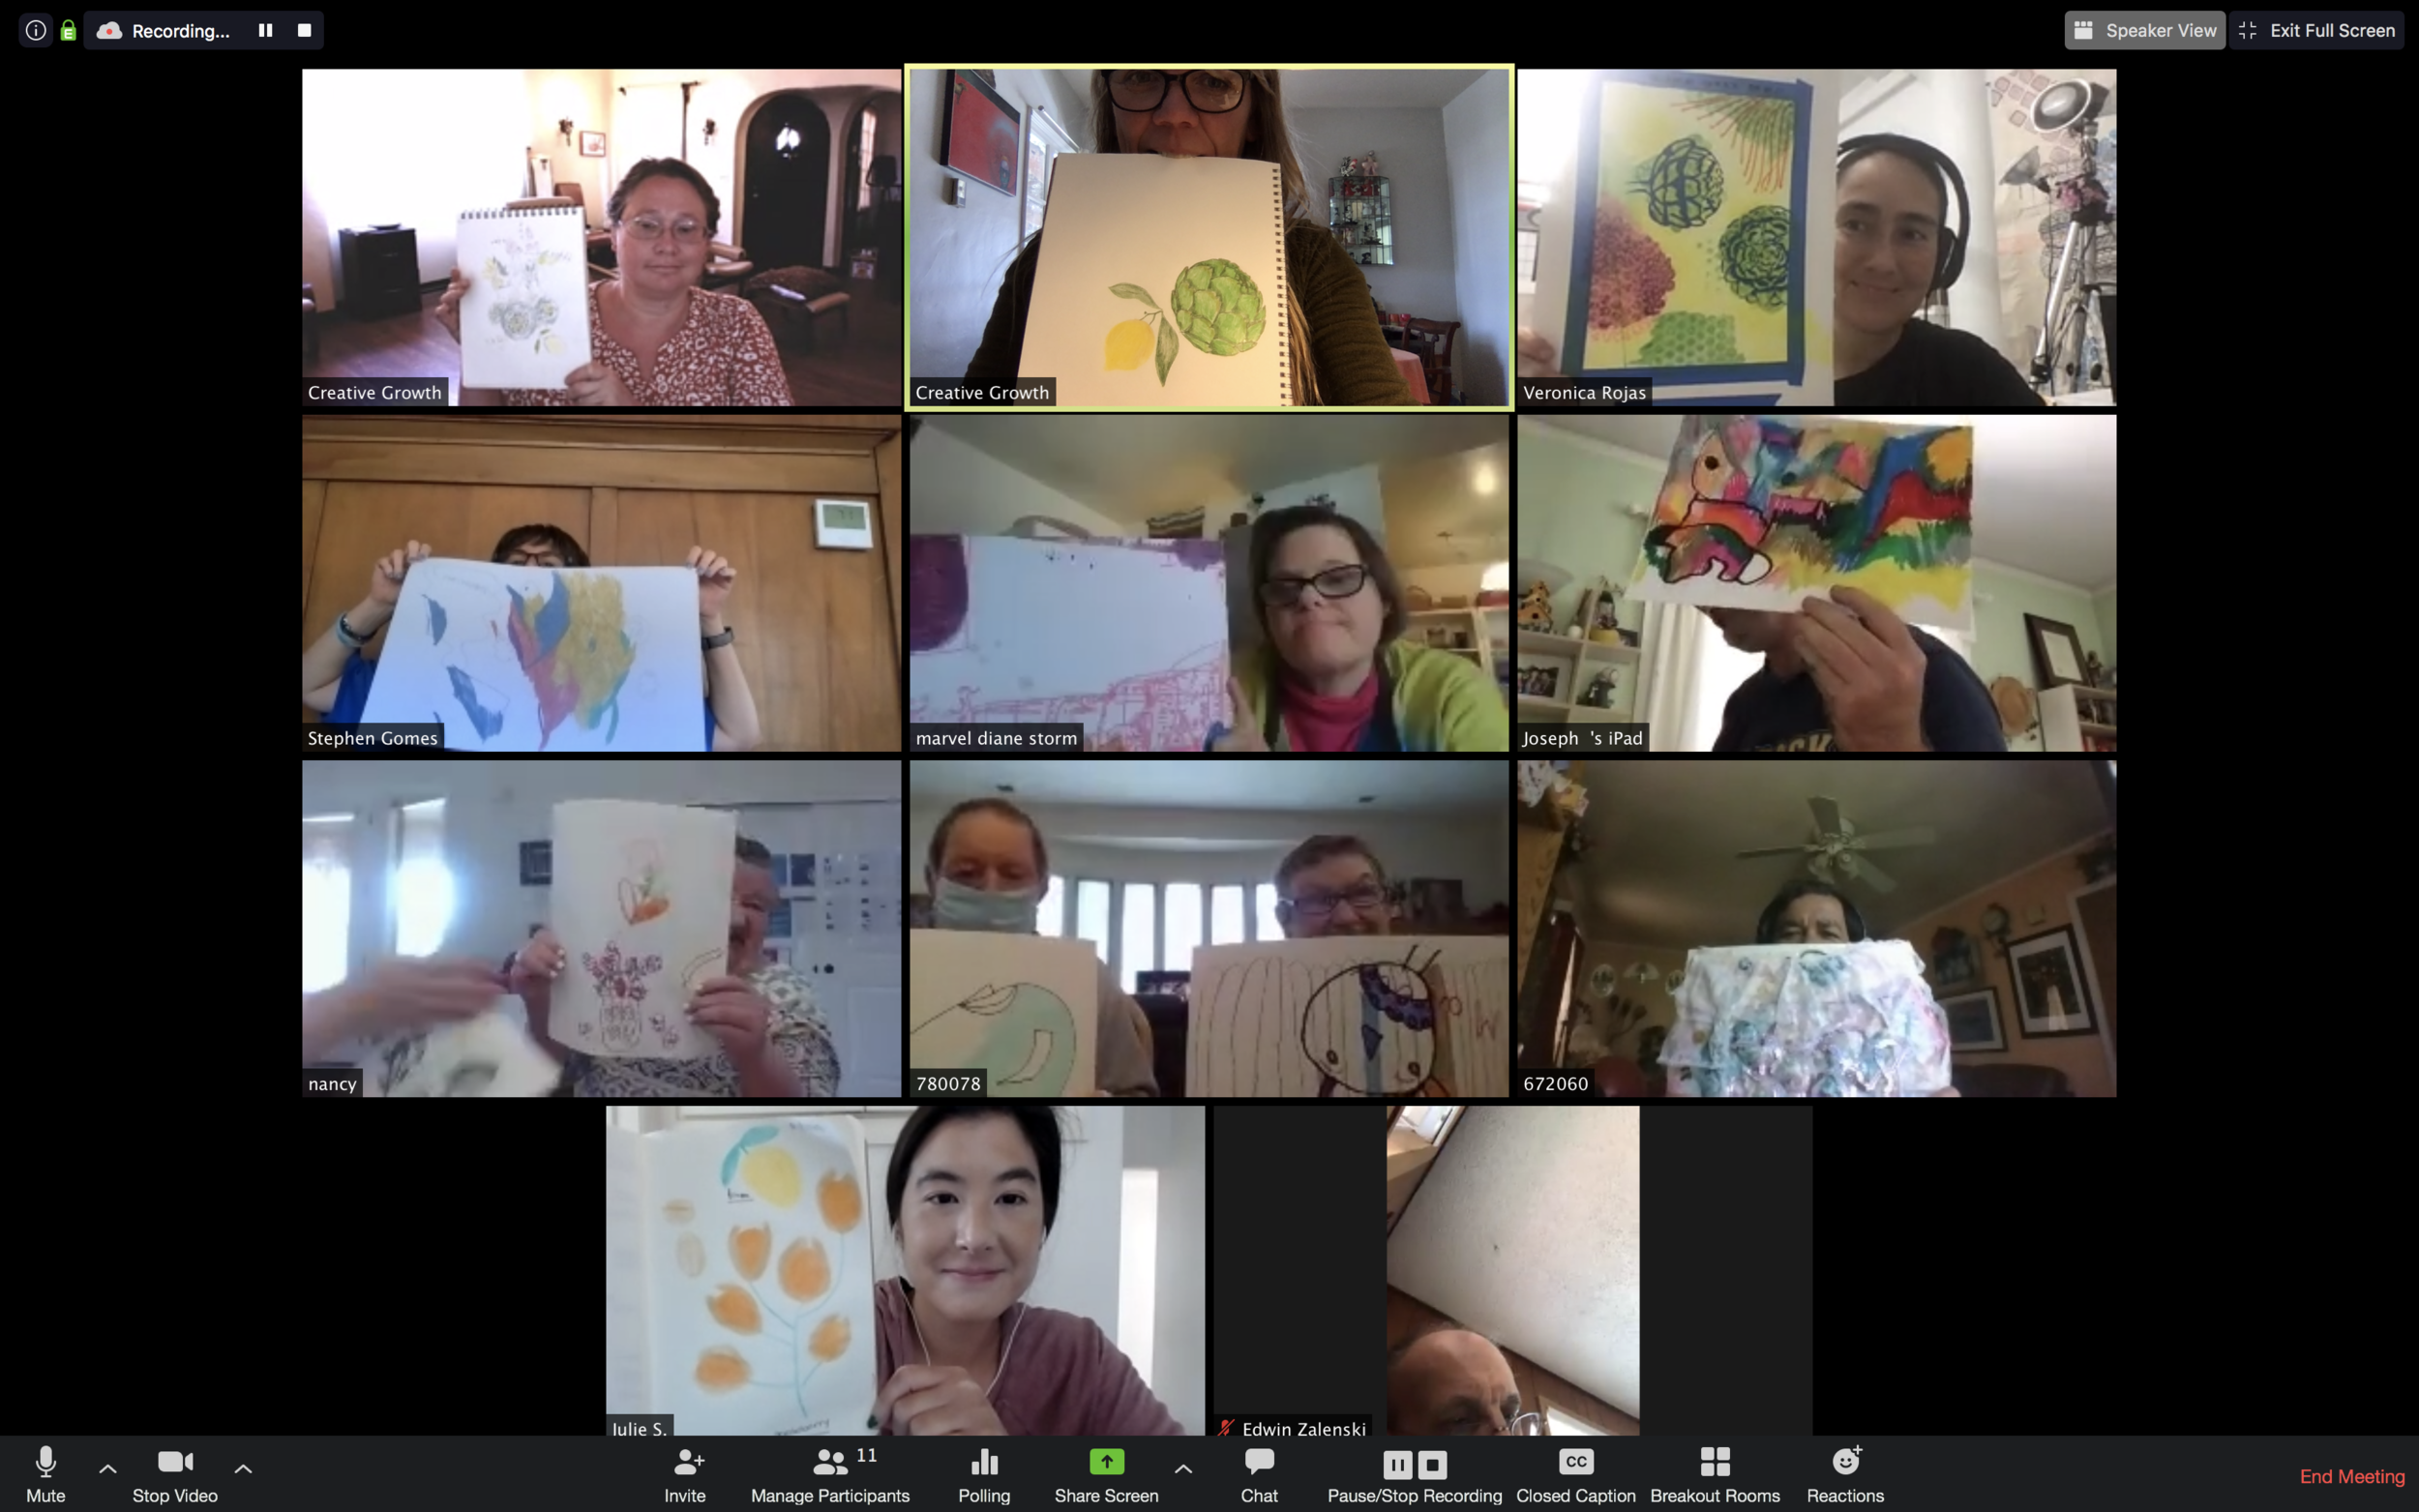 Meeting together online for one of the first times during a session titled "Creative Growth Connection"